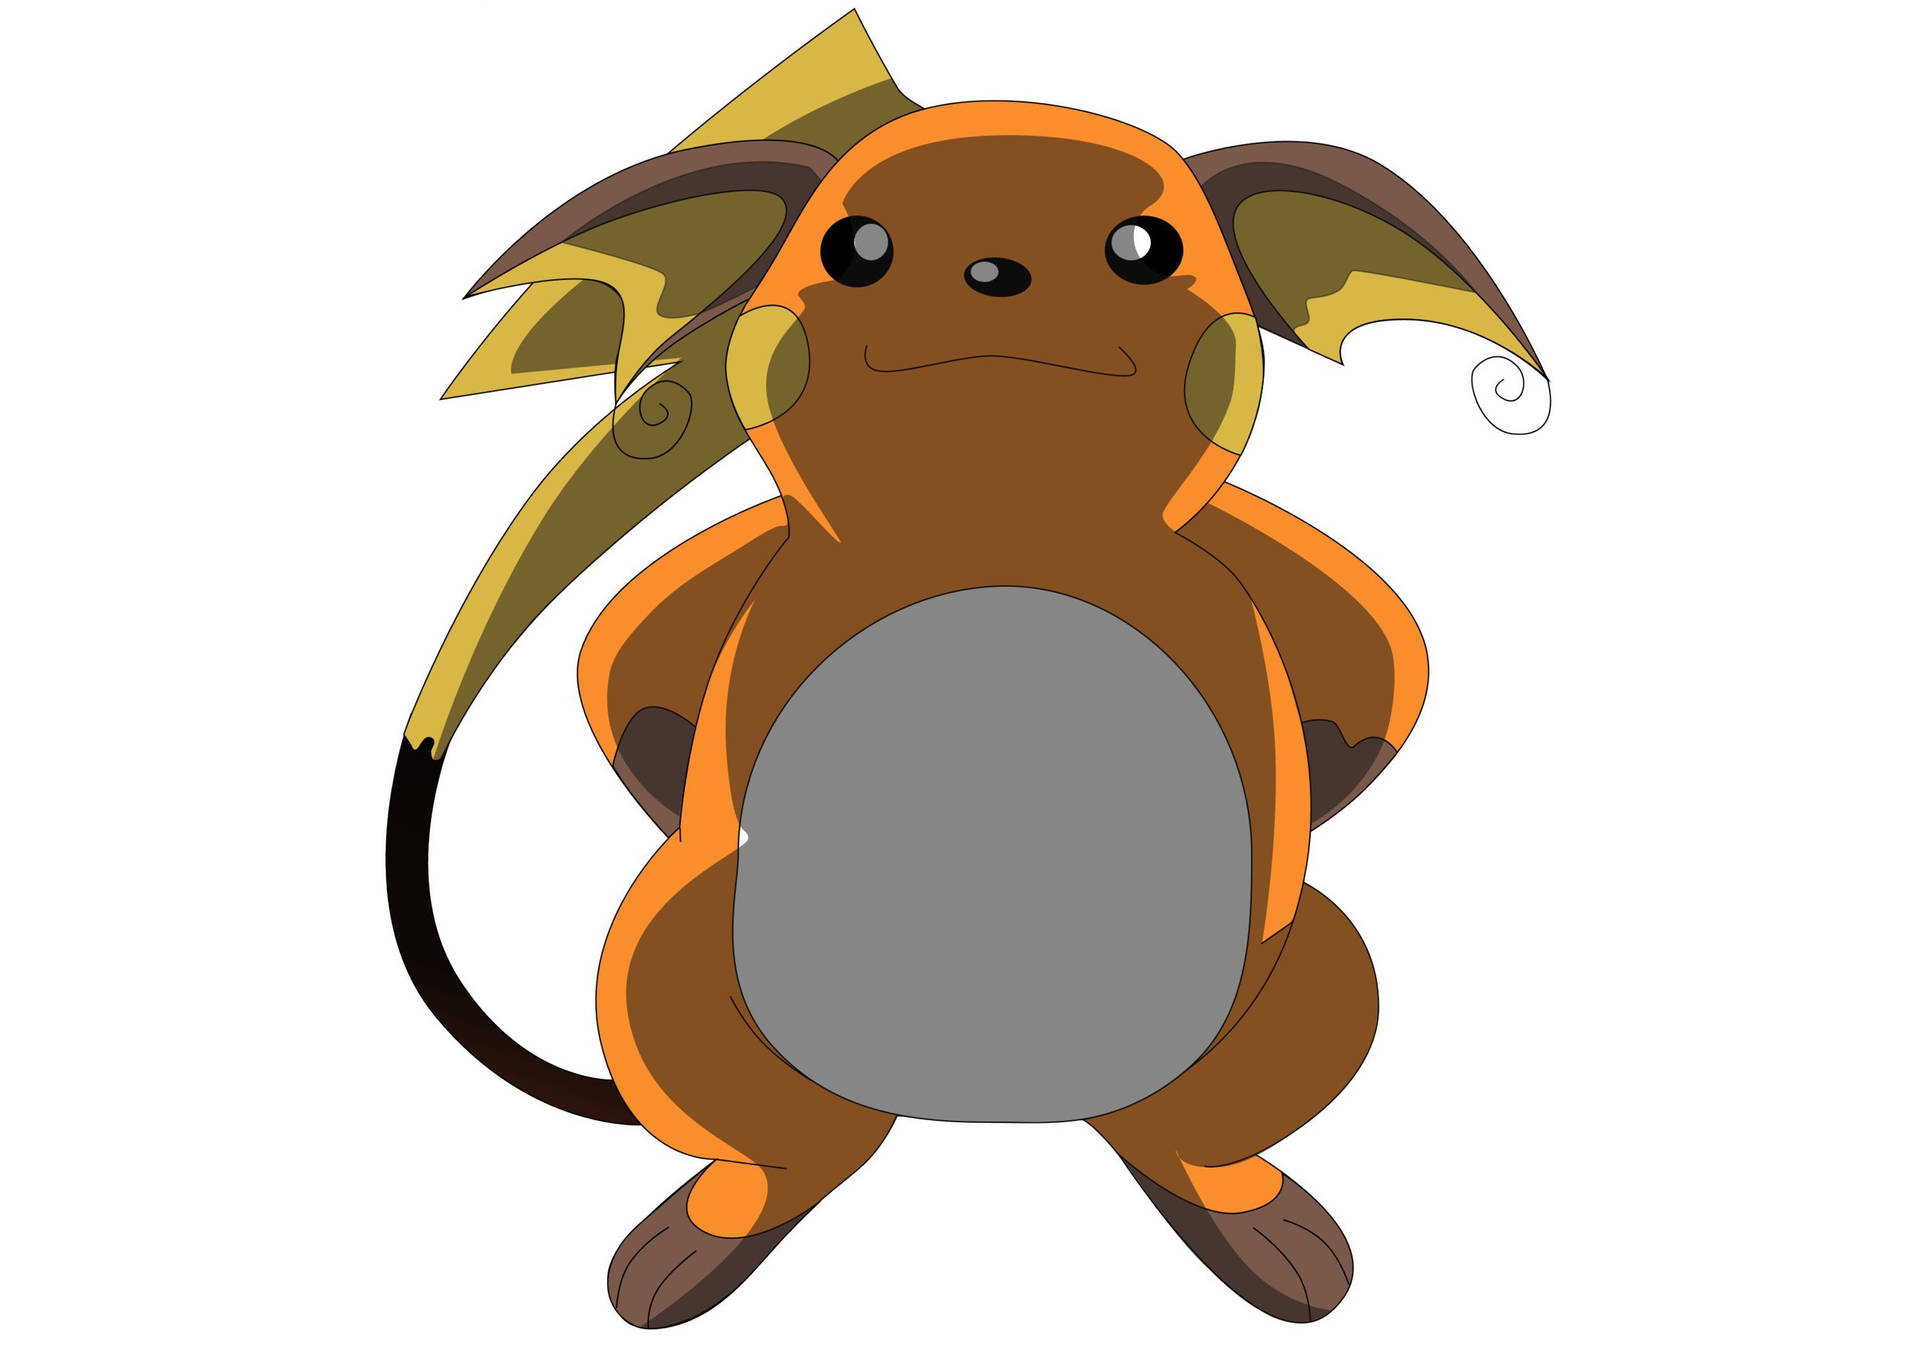 With its electricity crackling around it, this Raichu stands proud. Wallpaper